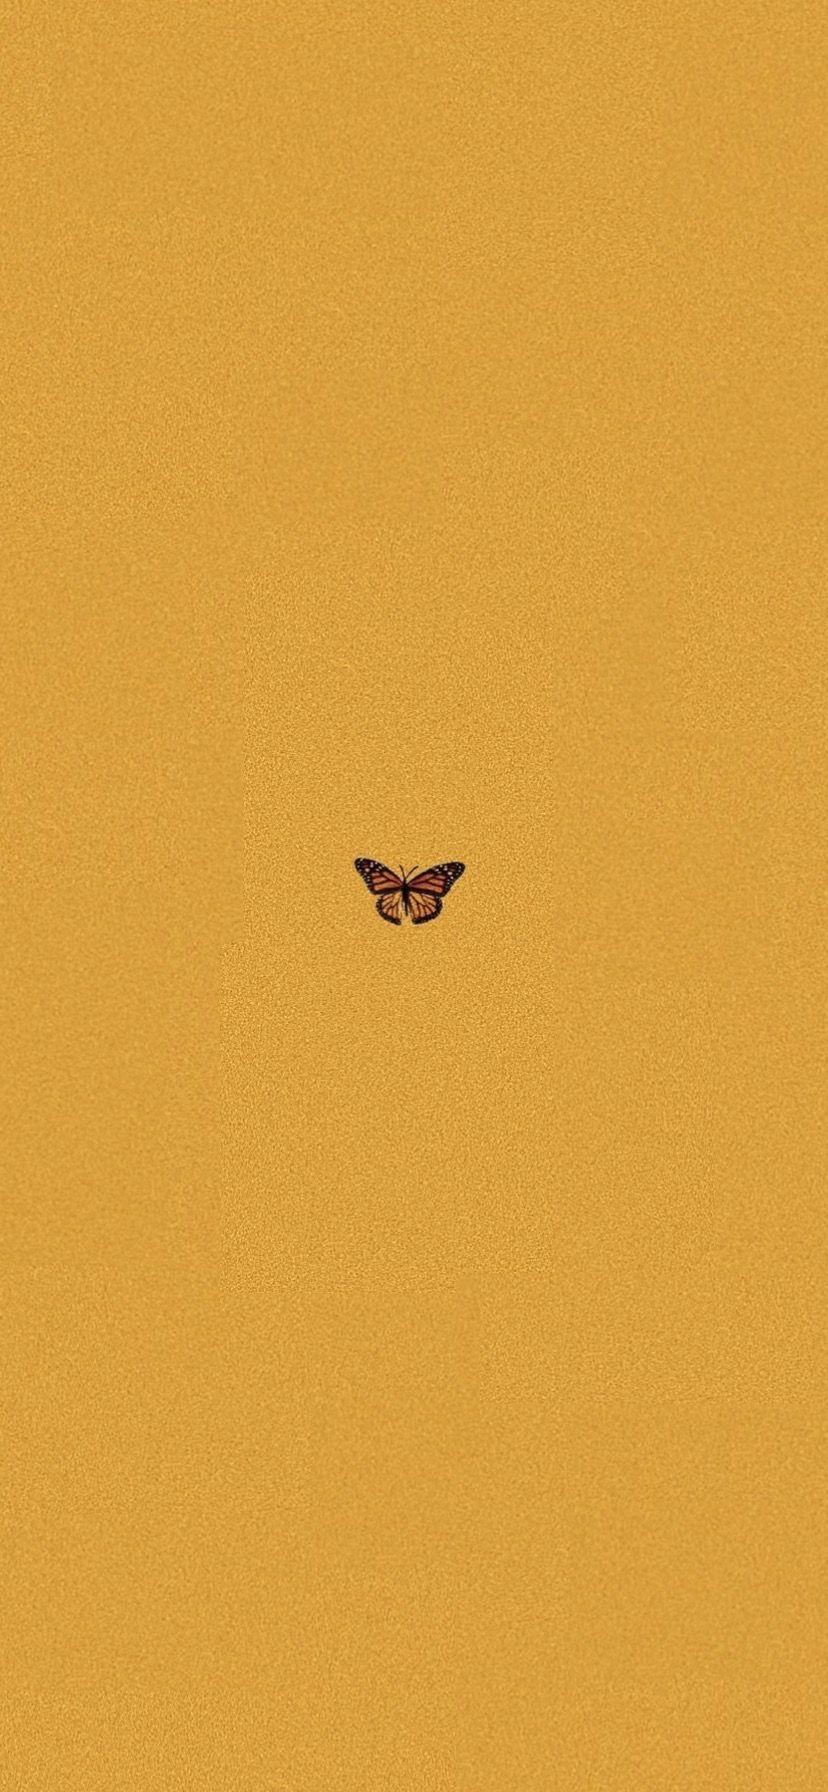 Wallpaper, yellow aesthetic butterfly IPhone X